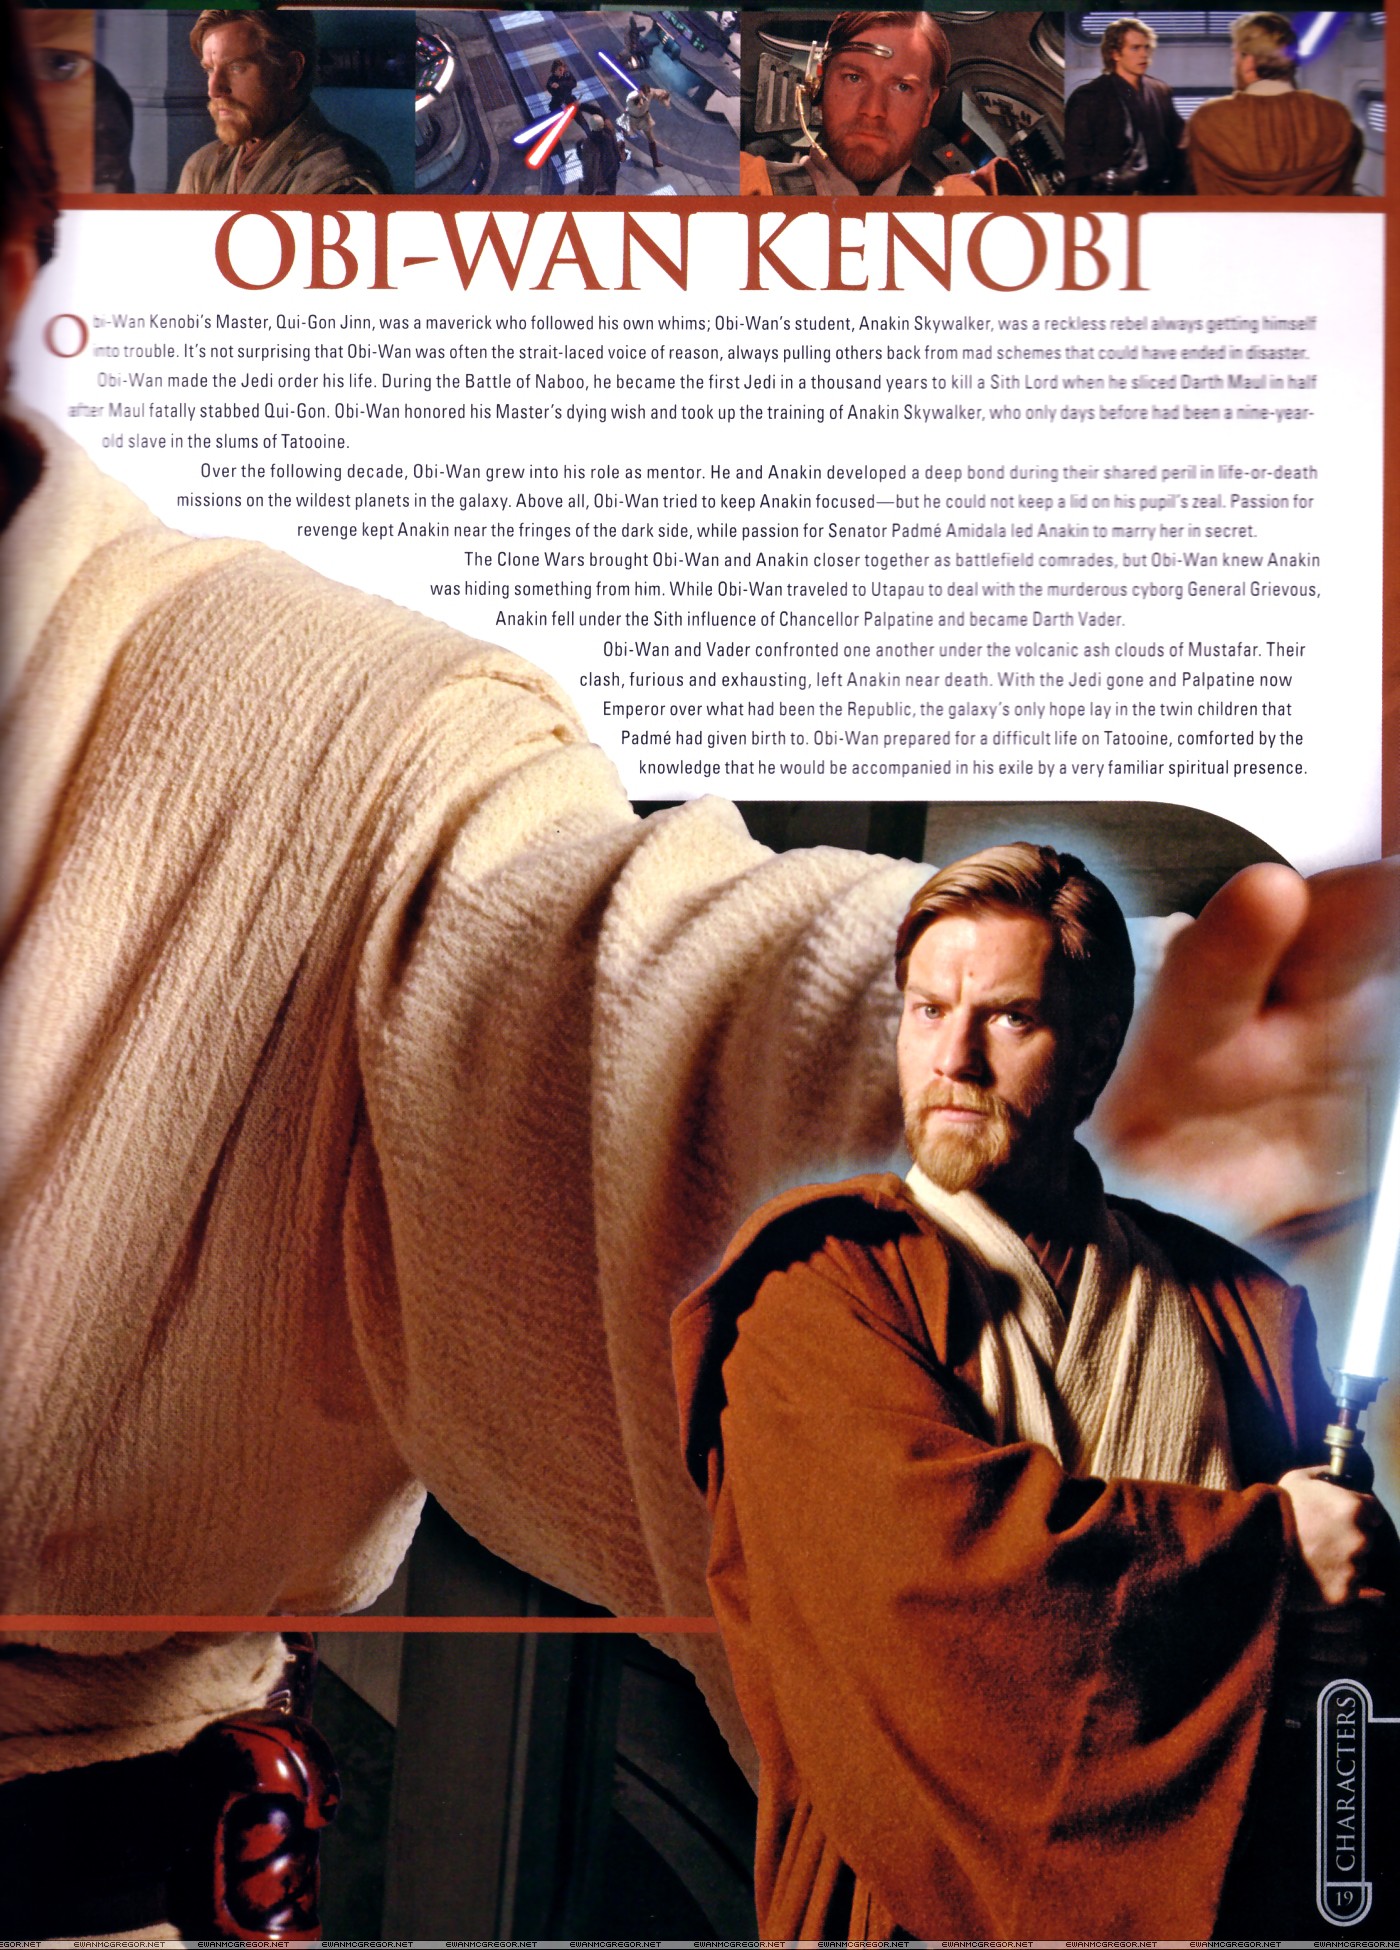 Star-Wars-Episode-III-Revenge-of-the-Sith-Extras-Souvenir-Guide-003.jpg